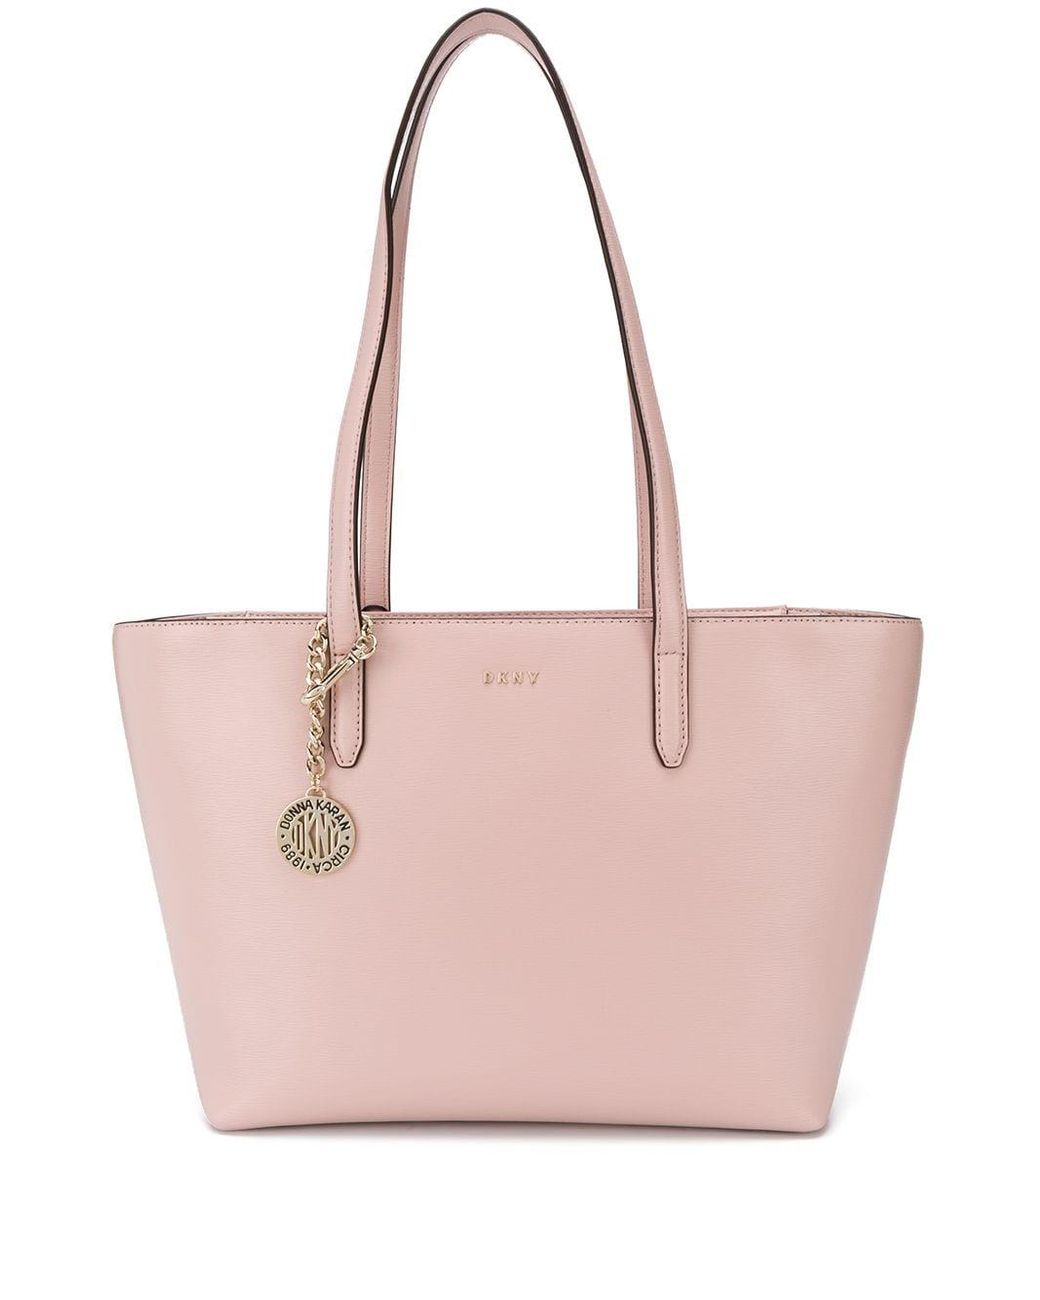 DKNY Leather Bryant Tote in Pink - Lyst